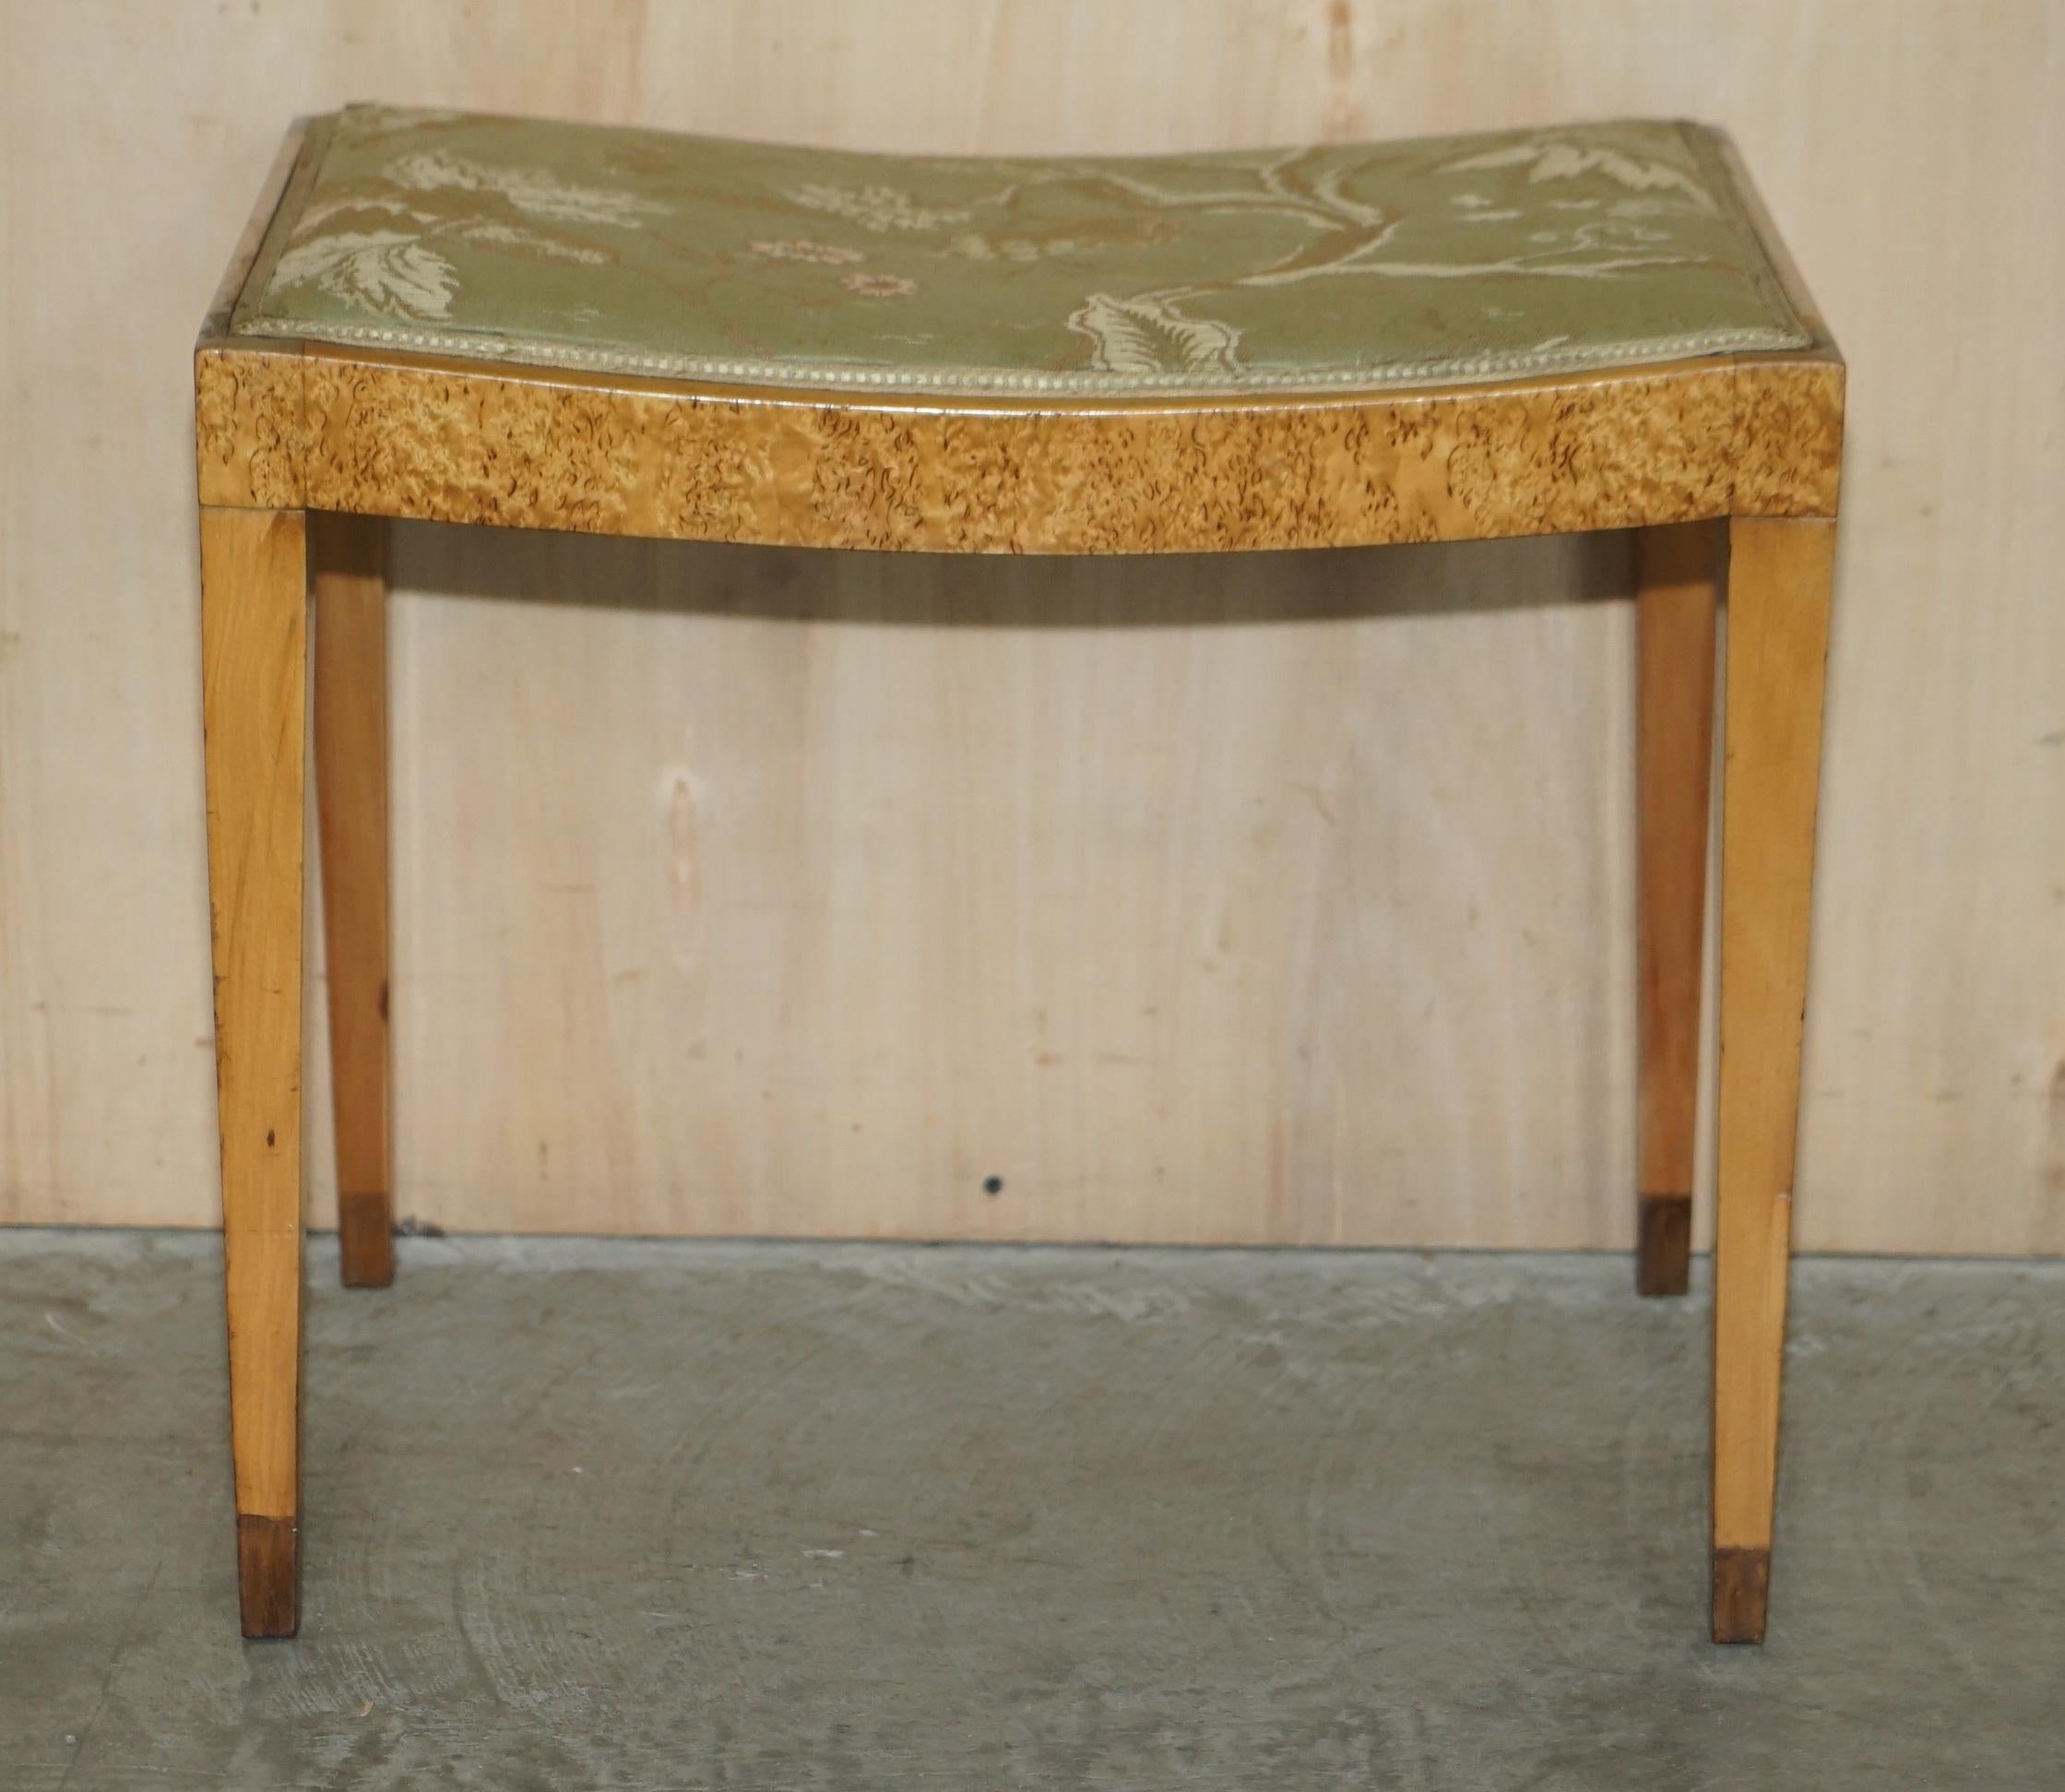 We are delighted to offer for sale this stunning original Art Deco Burr Maple dressing table stool which is part of a large suite

This is part of a suite, in total I have a side chair, dressing table stool, side cupboard, large double wardrobe,